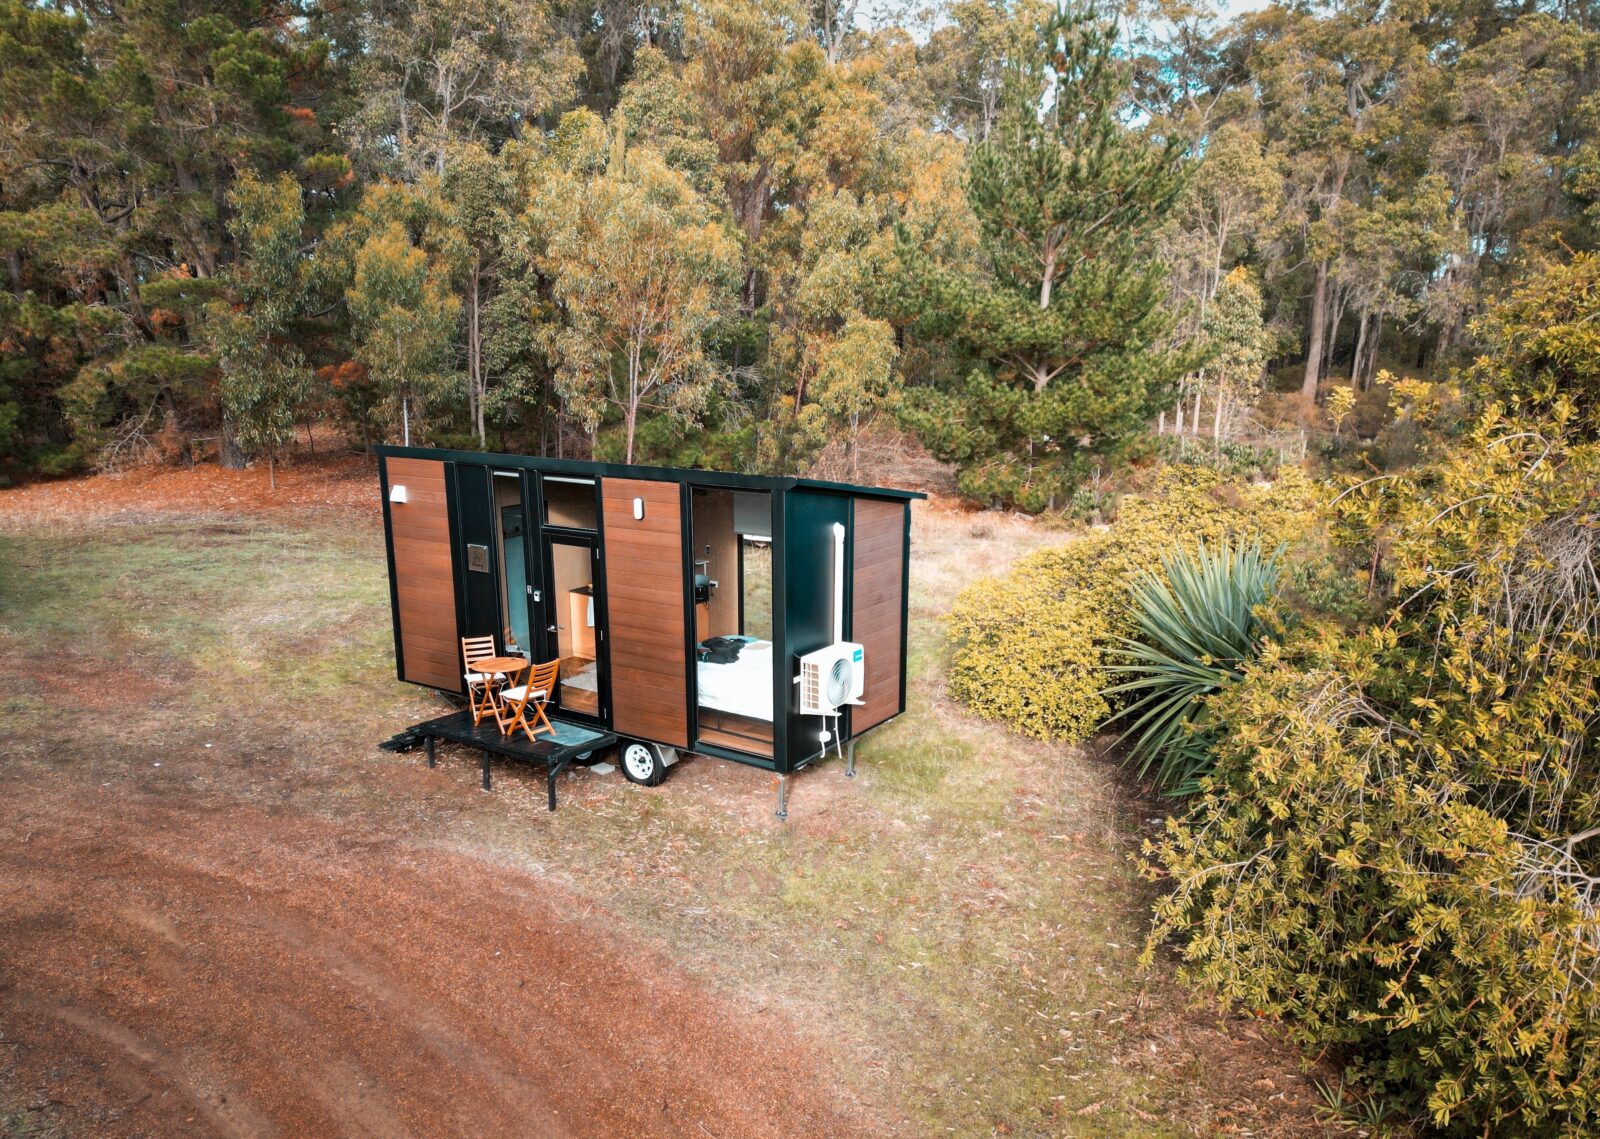 The Reyes tiny house that you will be living in